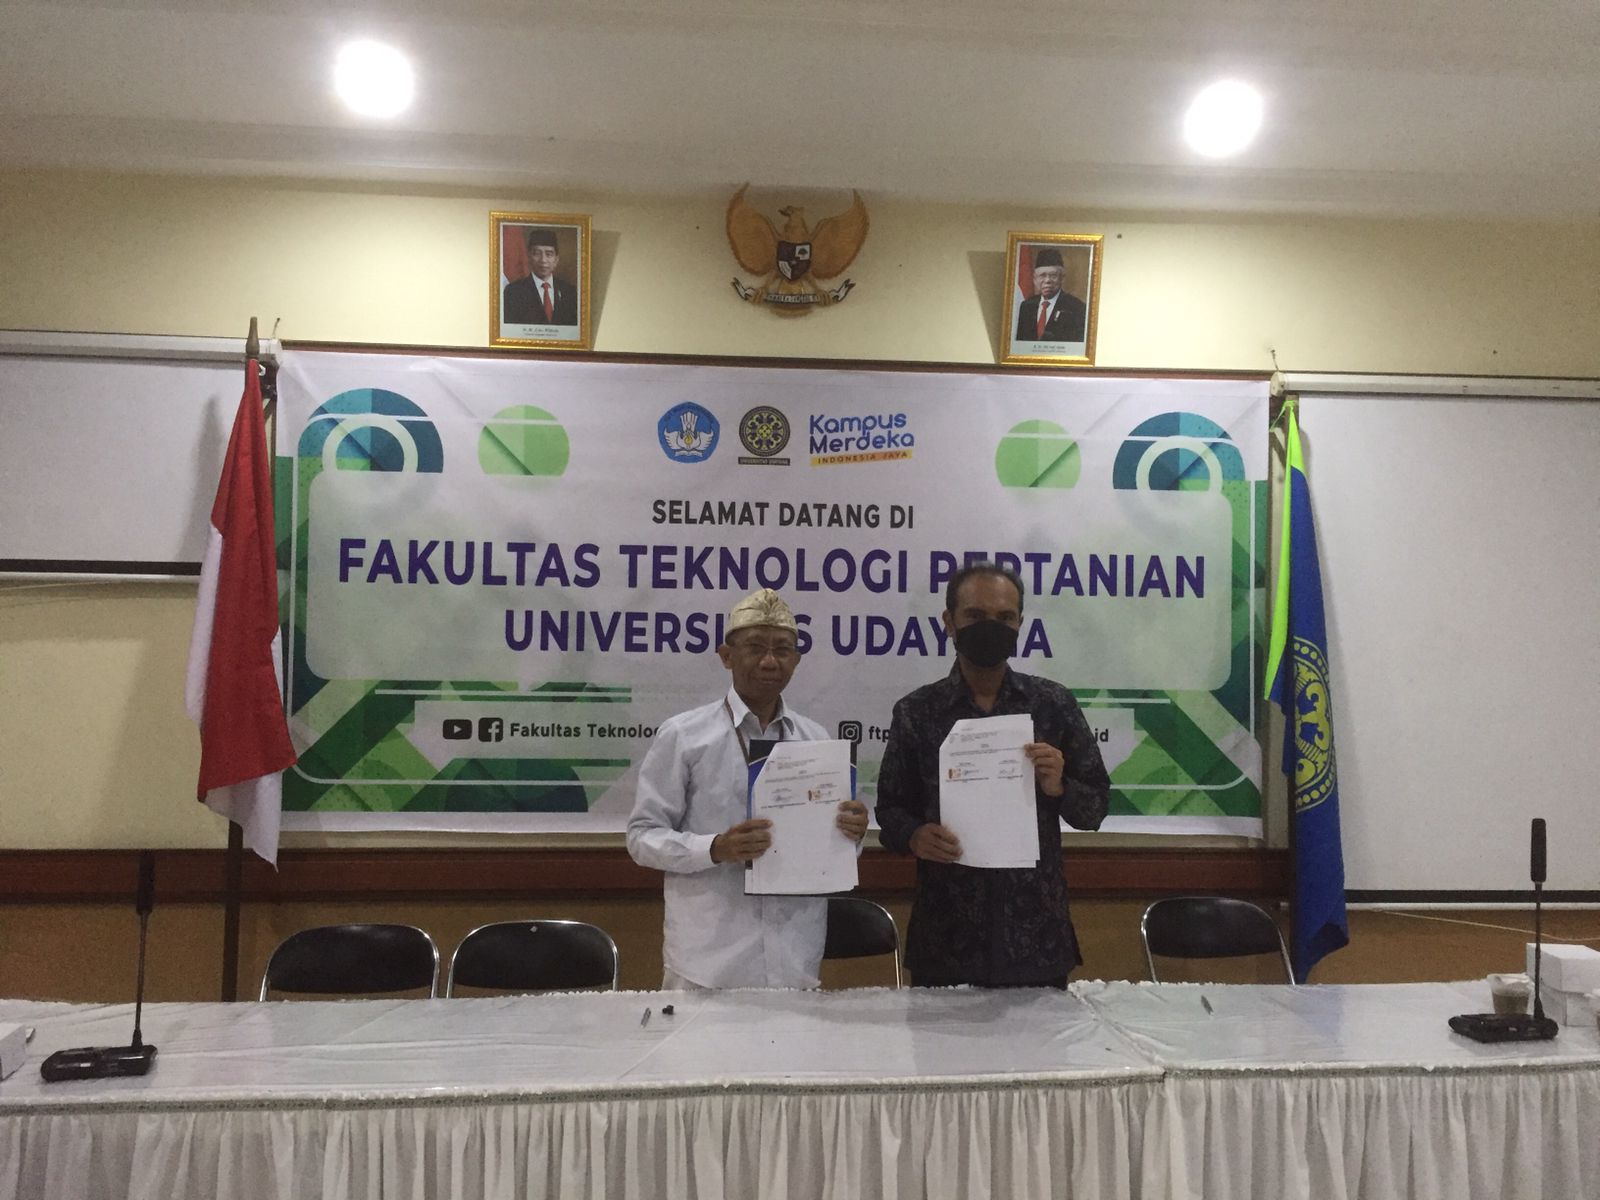 Signing the Cooperation Agreement, the FTP Brawijaya Visits FTP Unud